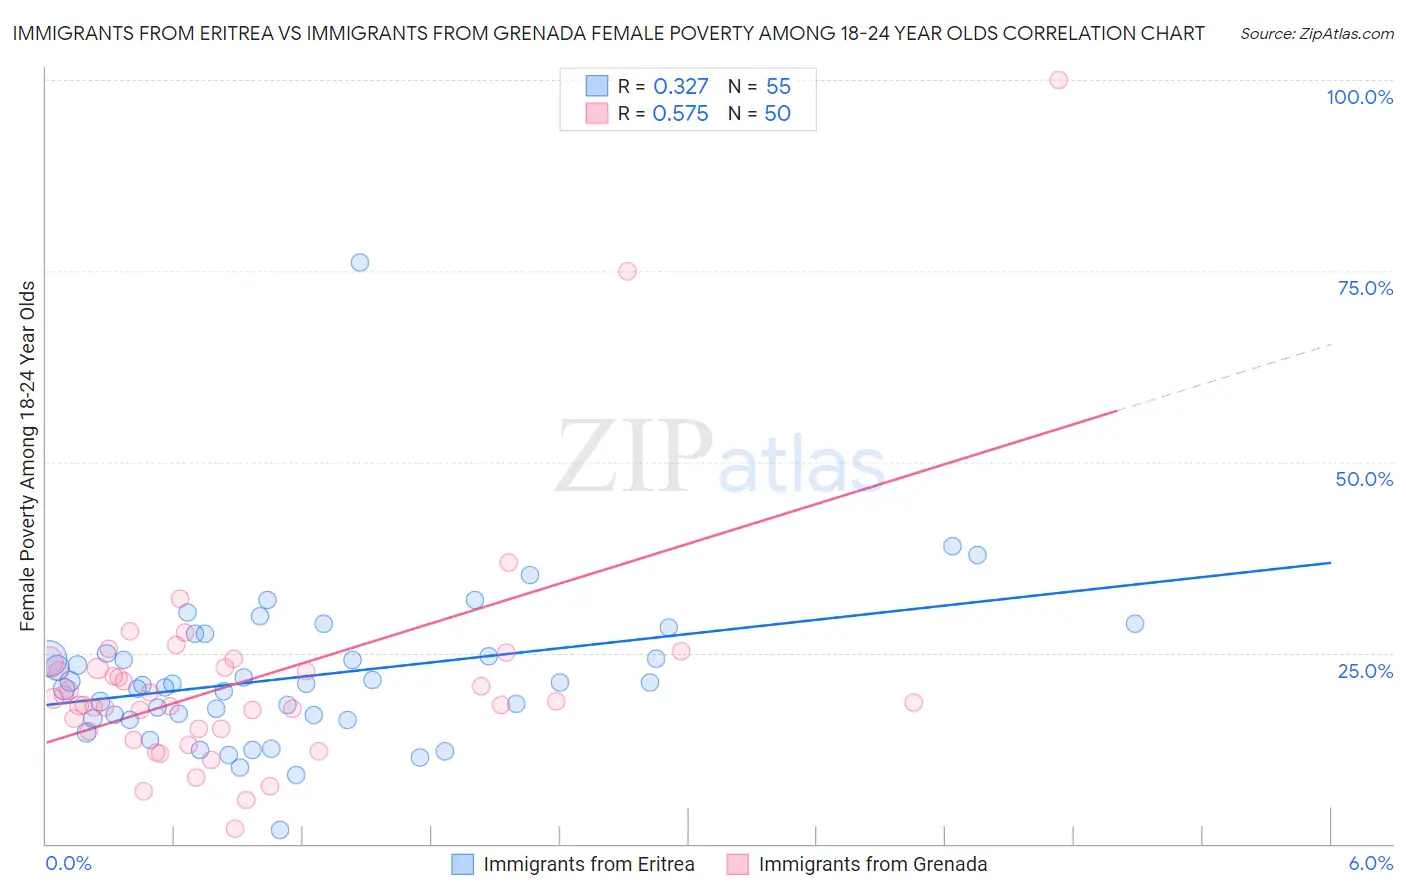 Immigrants from Eritrea vs Immigrants from Grenada Female Poverty Among 18-24 Year Olds